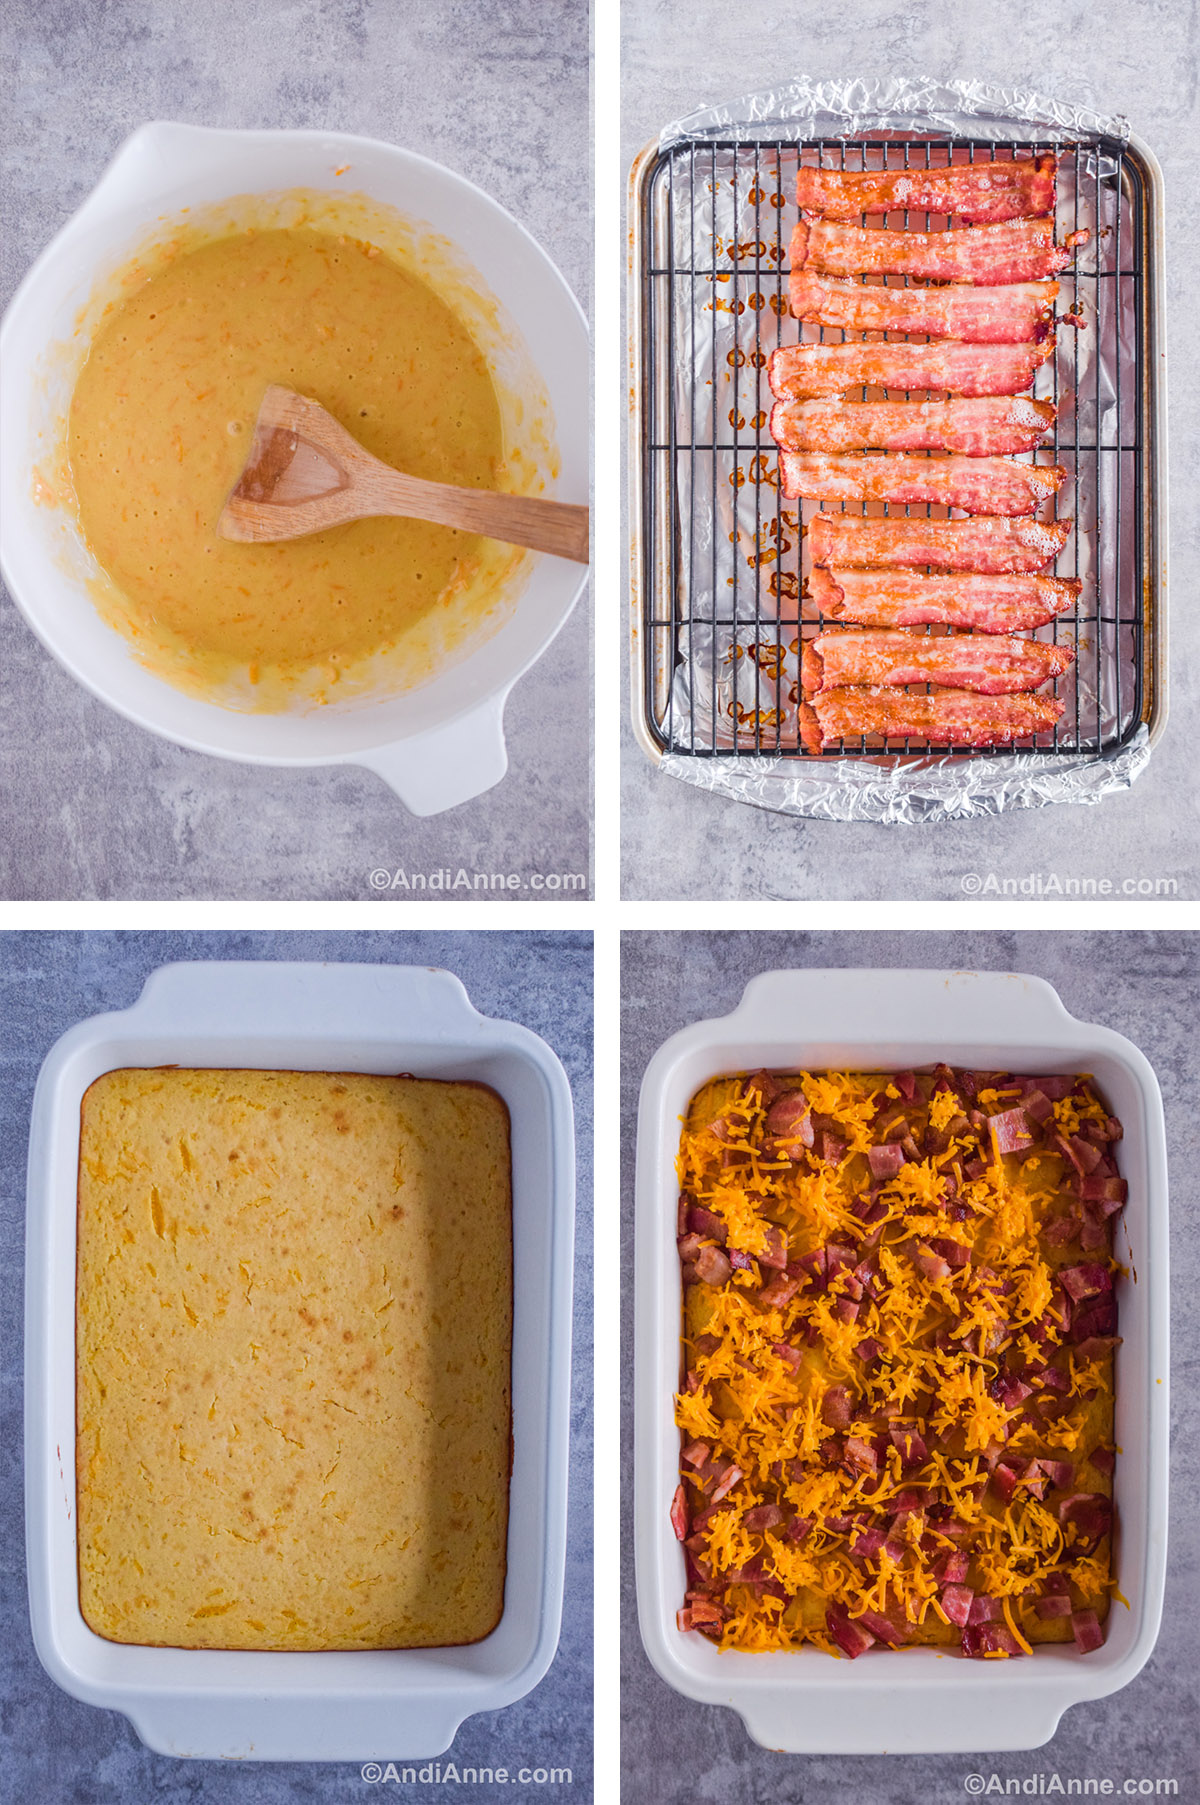 Four images showing steps to make recipe. First is a white bowl with batter and a wood spatula. Second is bacon strips on a baking rack. Baked pancake in a white casserole dish. Four image is shredded cheese and crumbled bacon on top of pancake in a casserole dish.